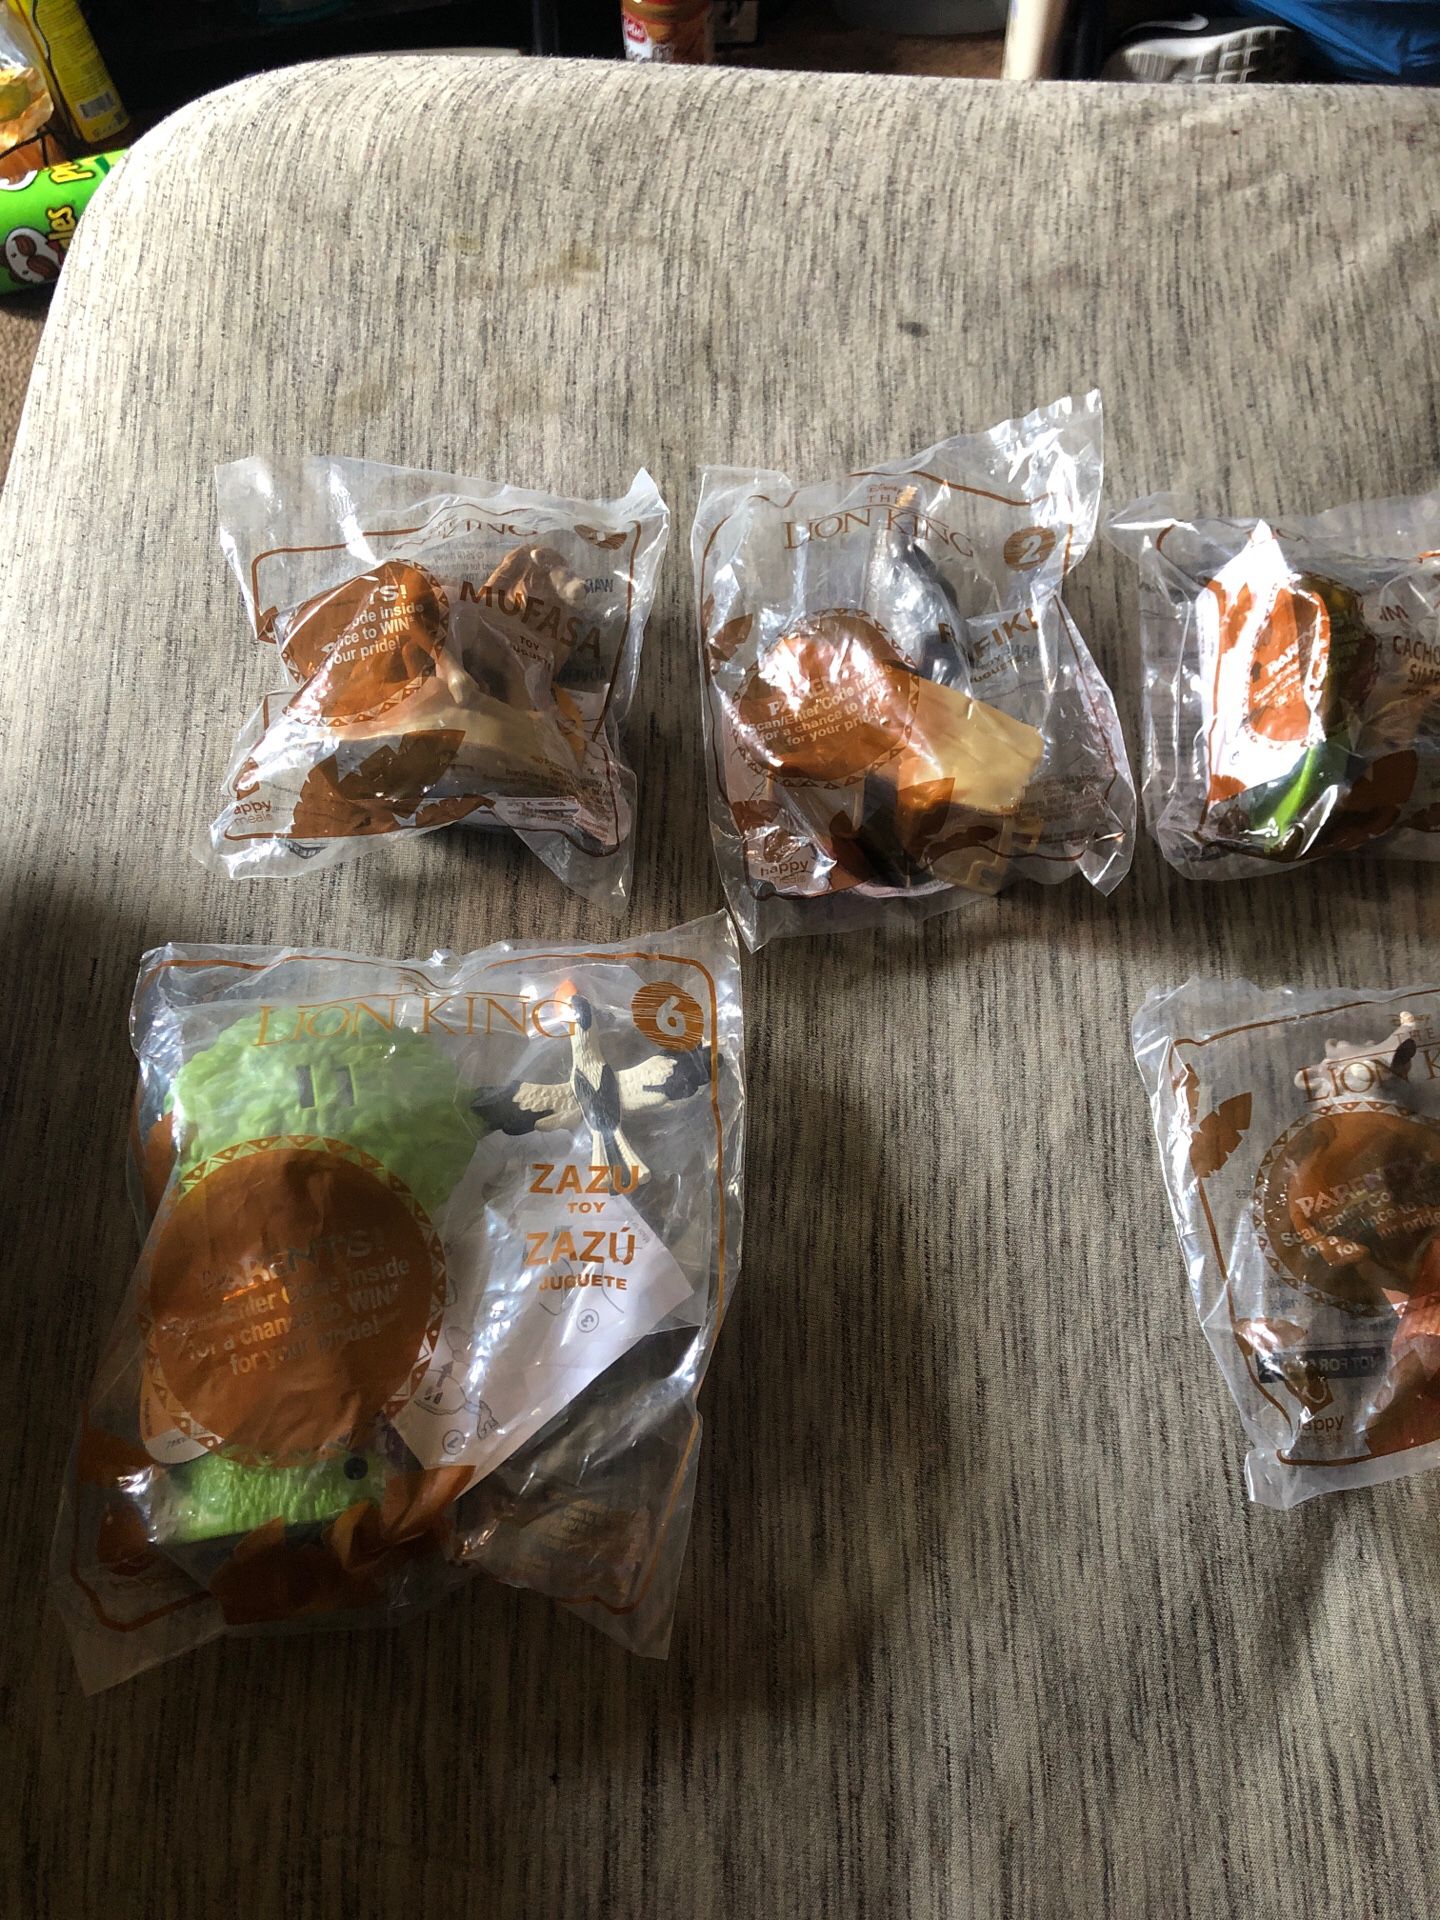 McDonald’s Lion king toy collection